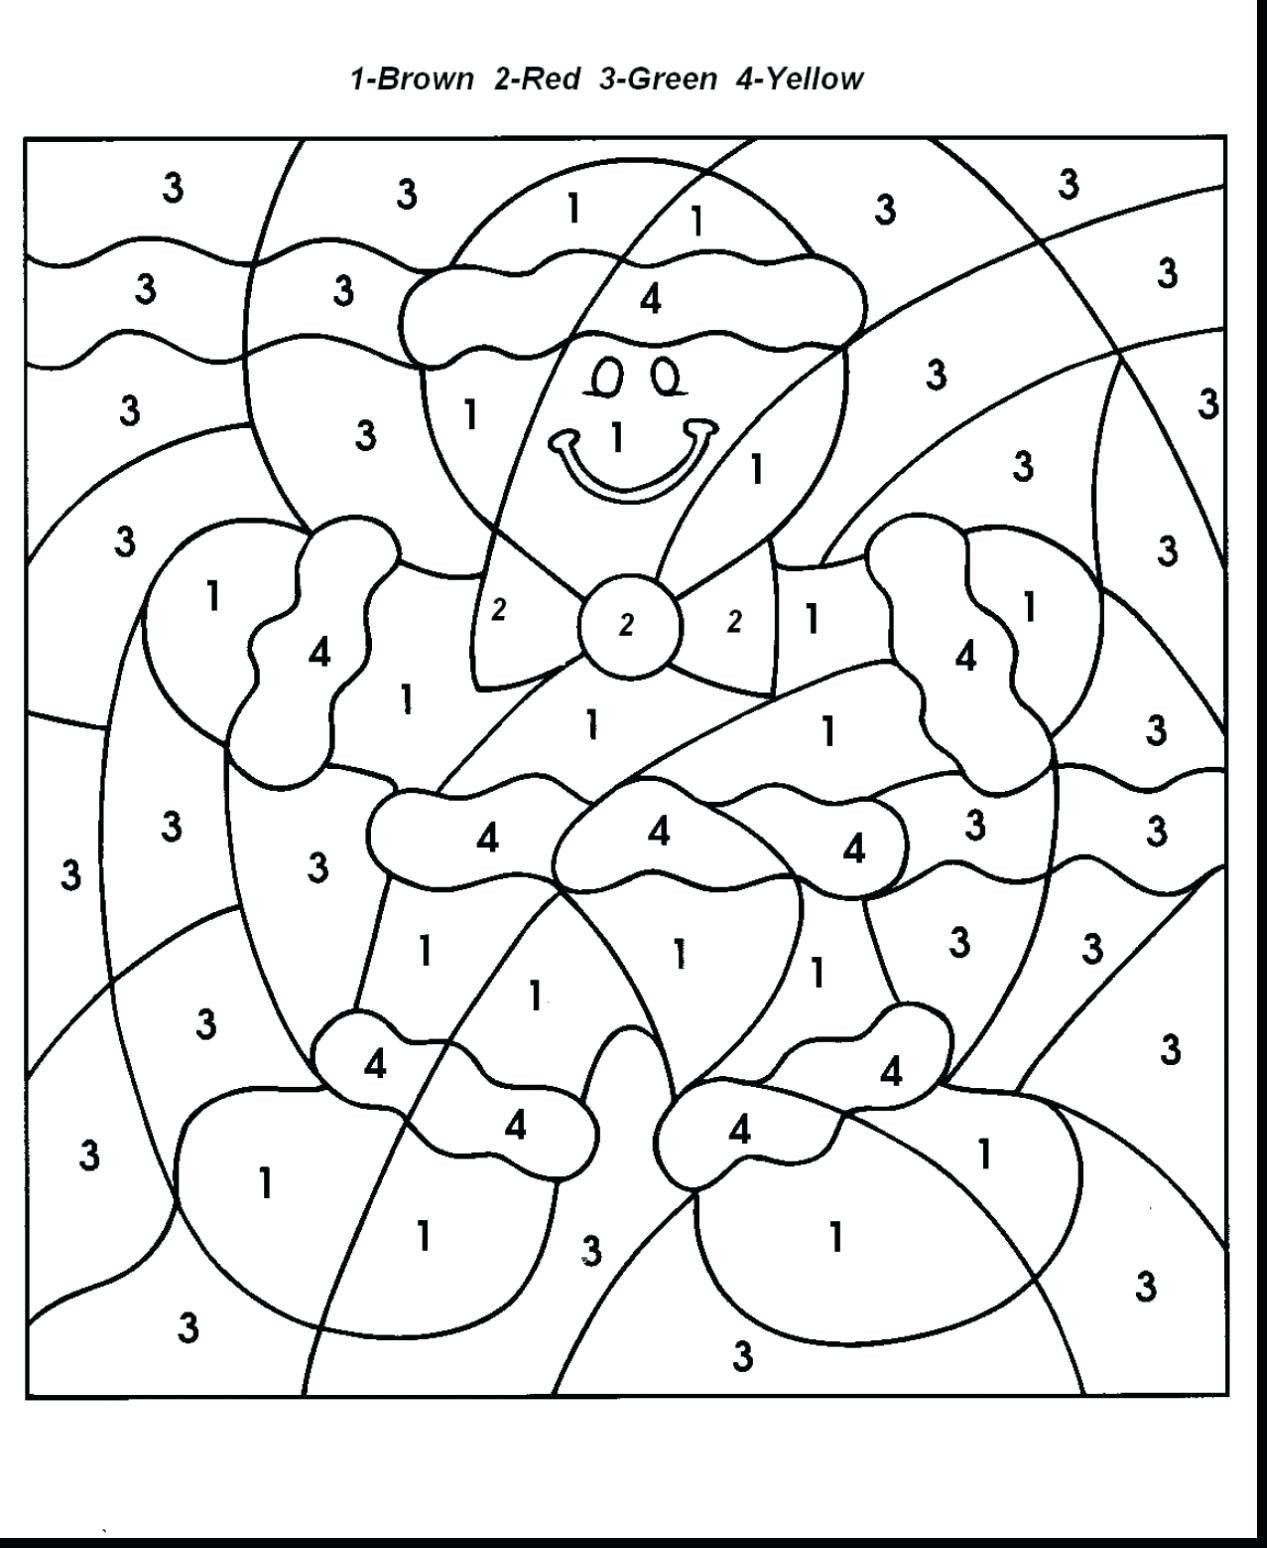 Math Coloring Pages 2nd Grade At Getcoloringscom Free Subtraction Color By Number Math